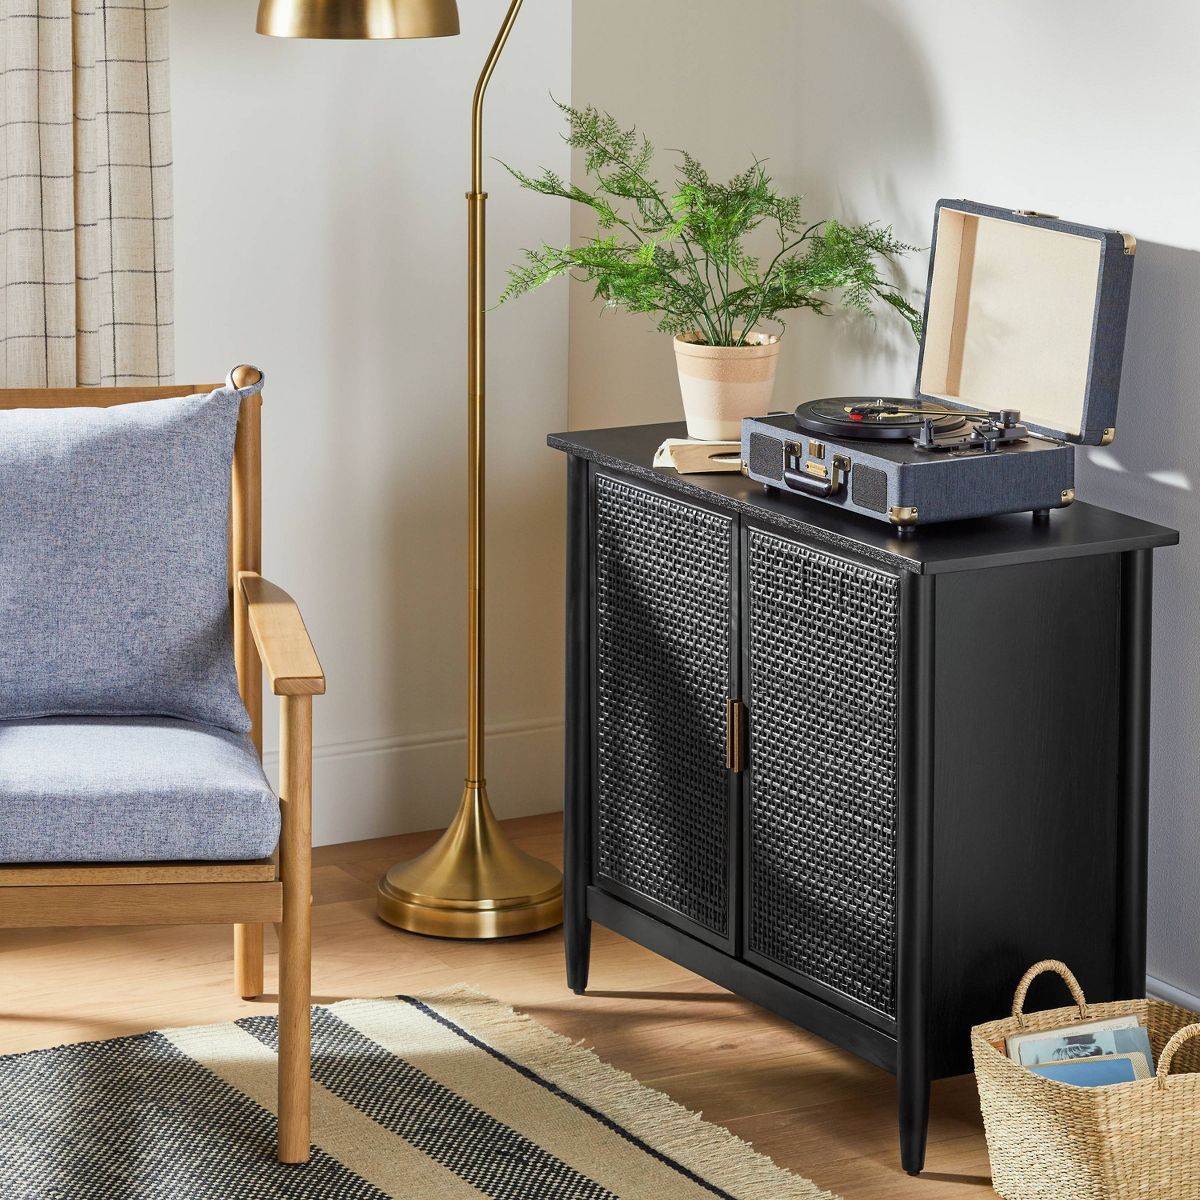 Wood & Cane Storage Cabinet - Hearth & Hand™ with Magnolia | Target